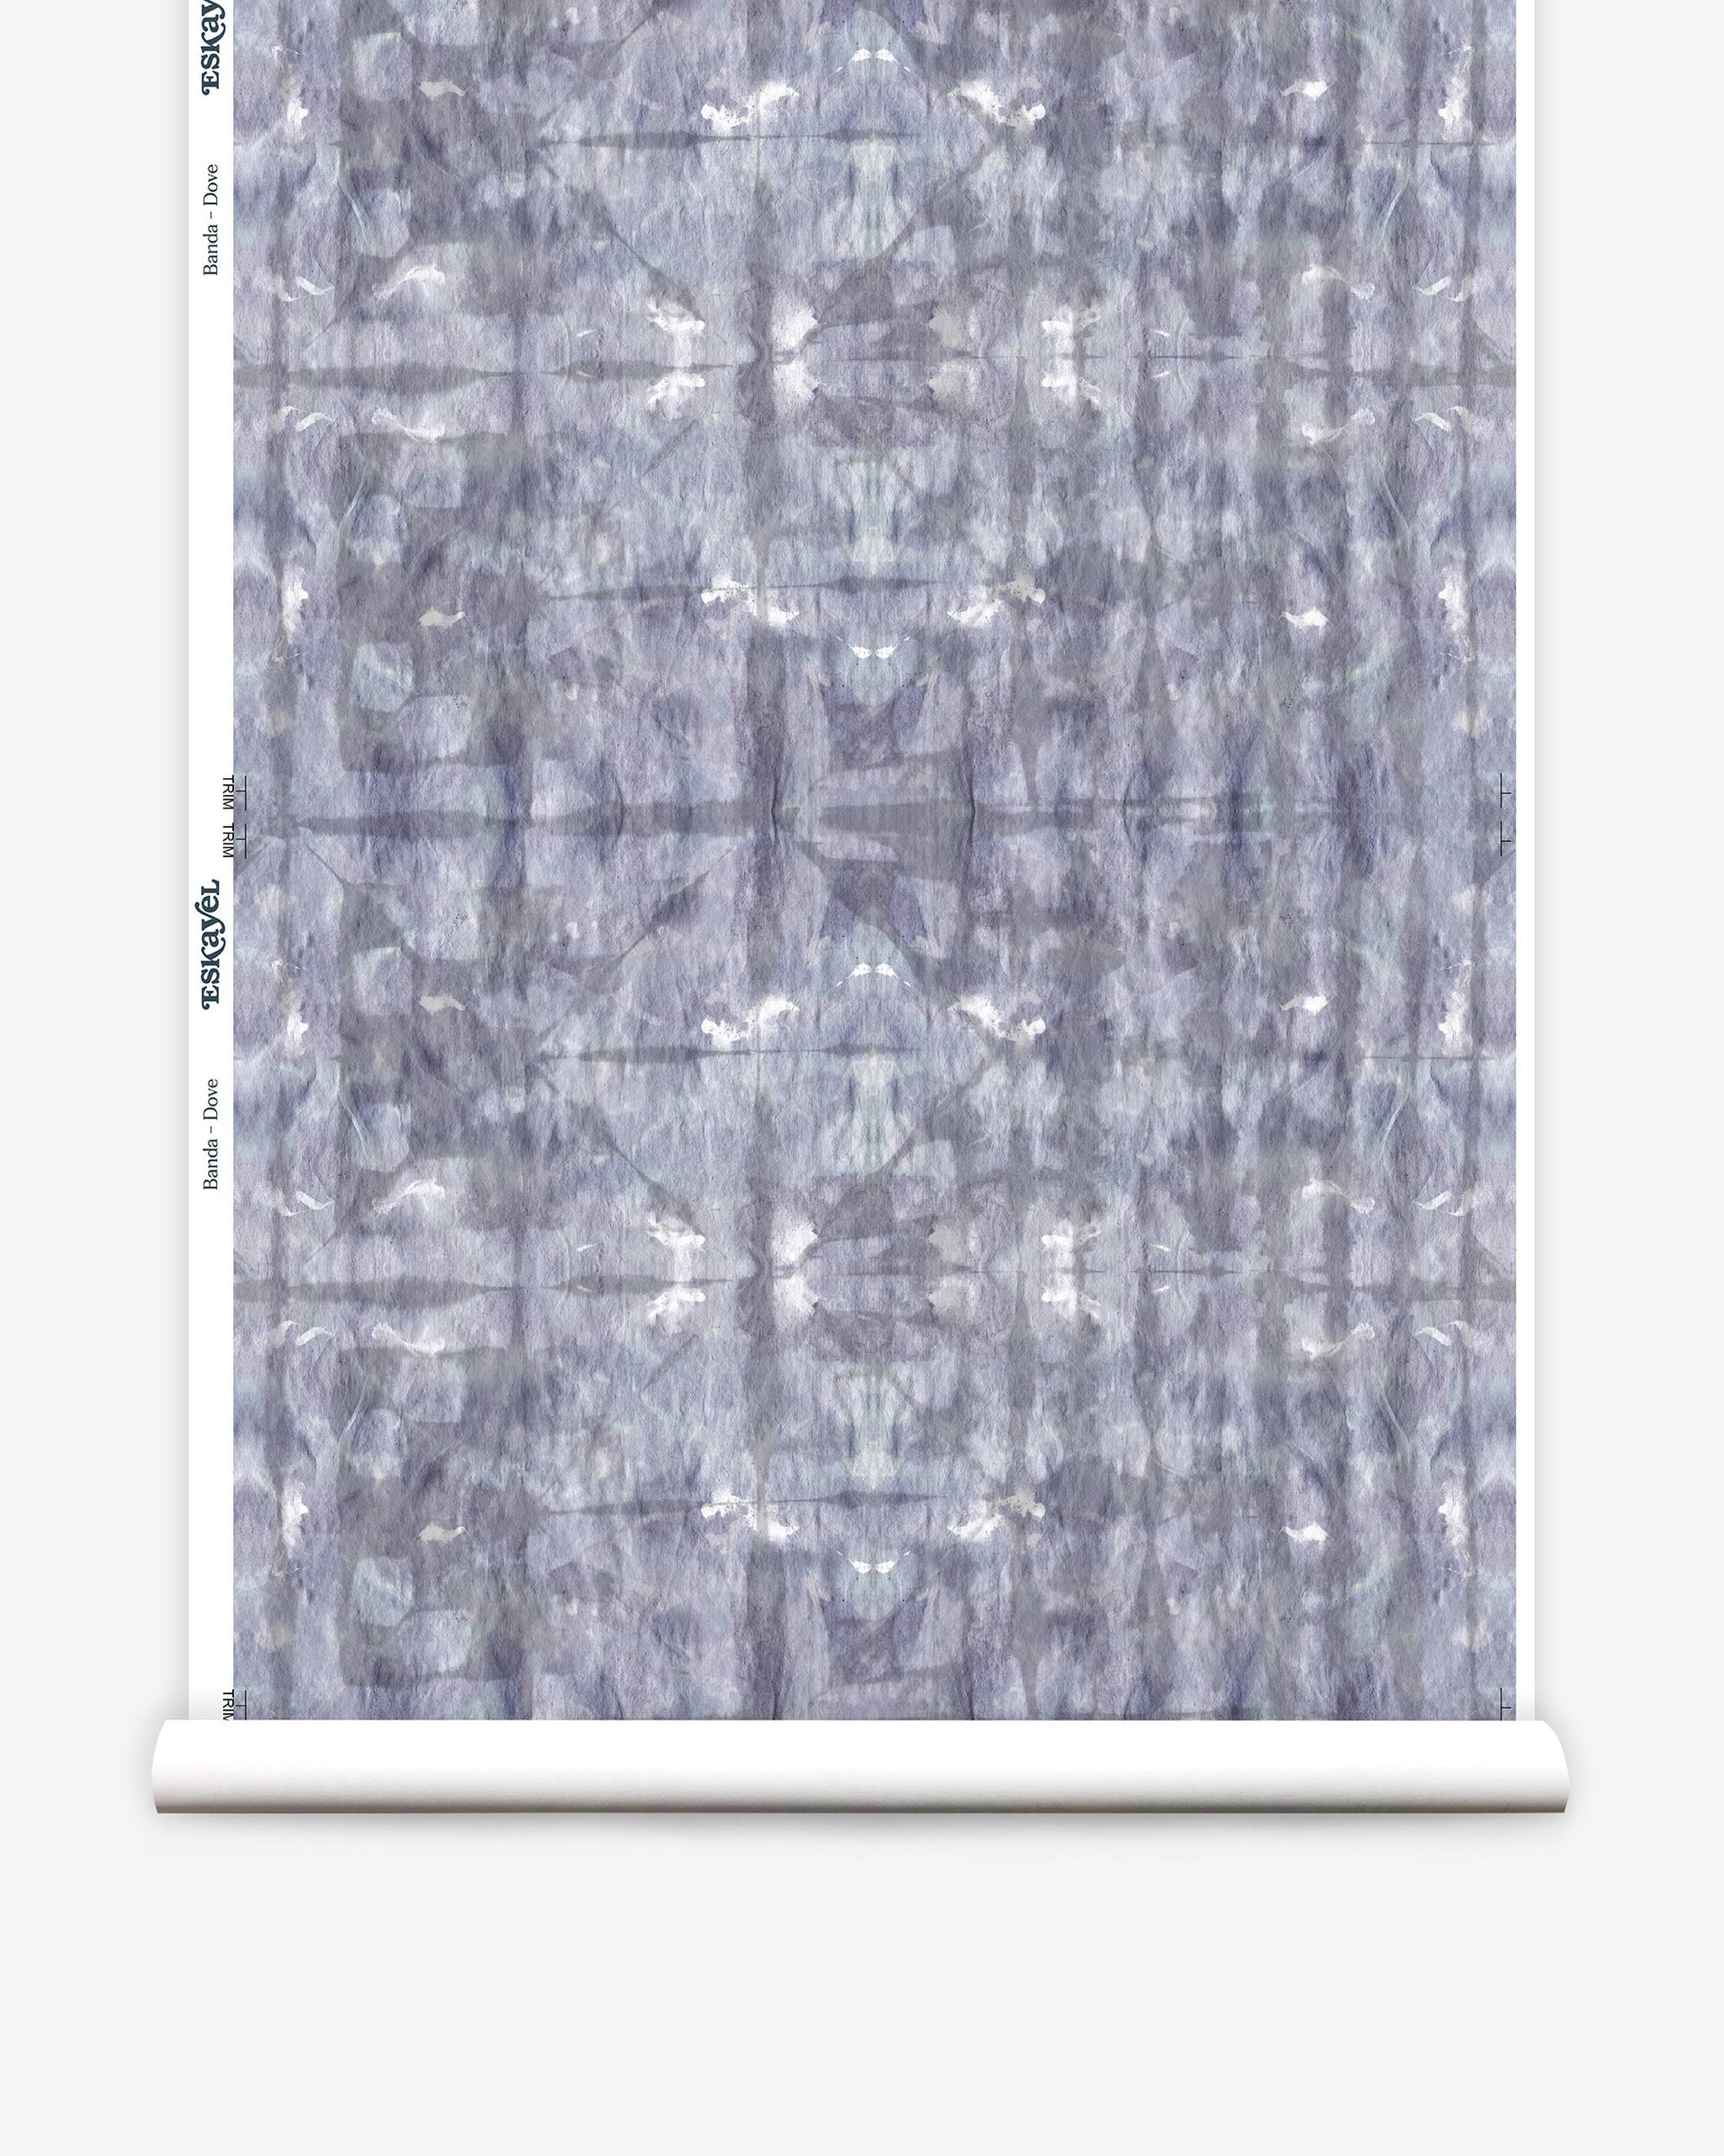 A roll of Banda Wallpaper Dove with a blue and white Shibori tie-dye pattern on it